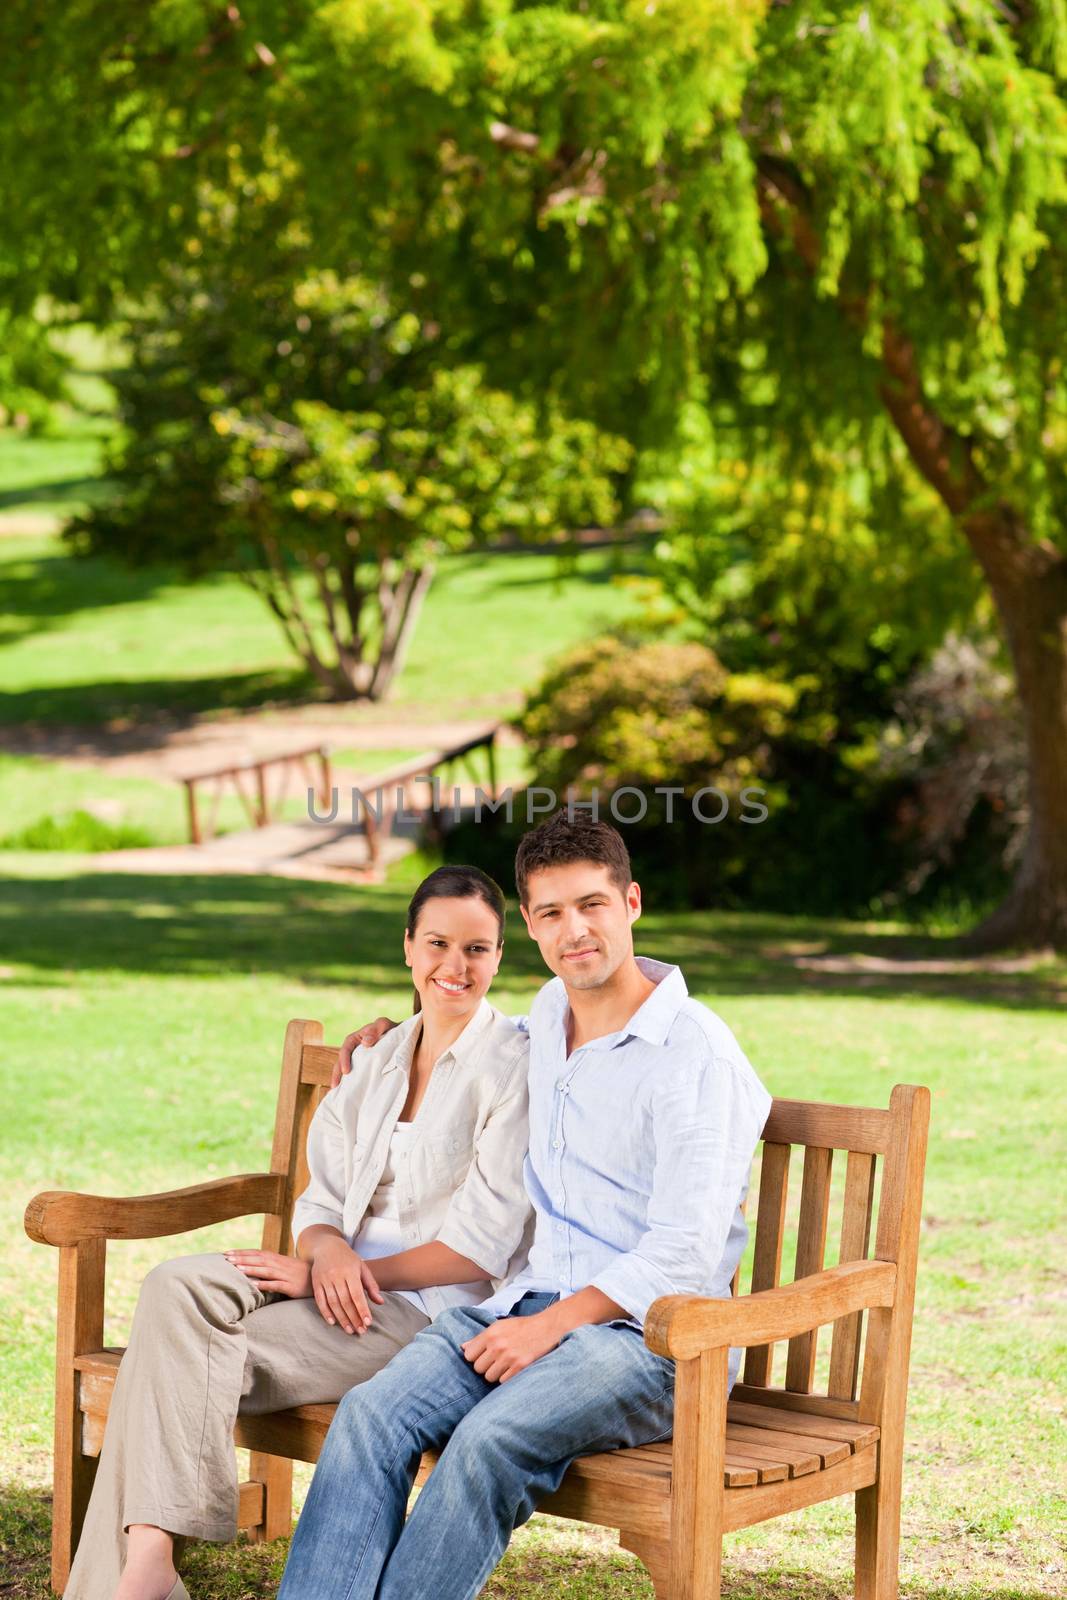 Couple on the bench during the summer